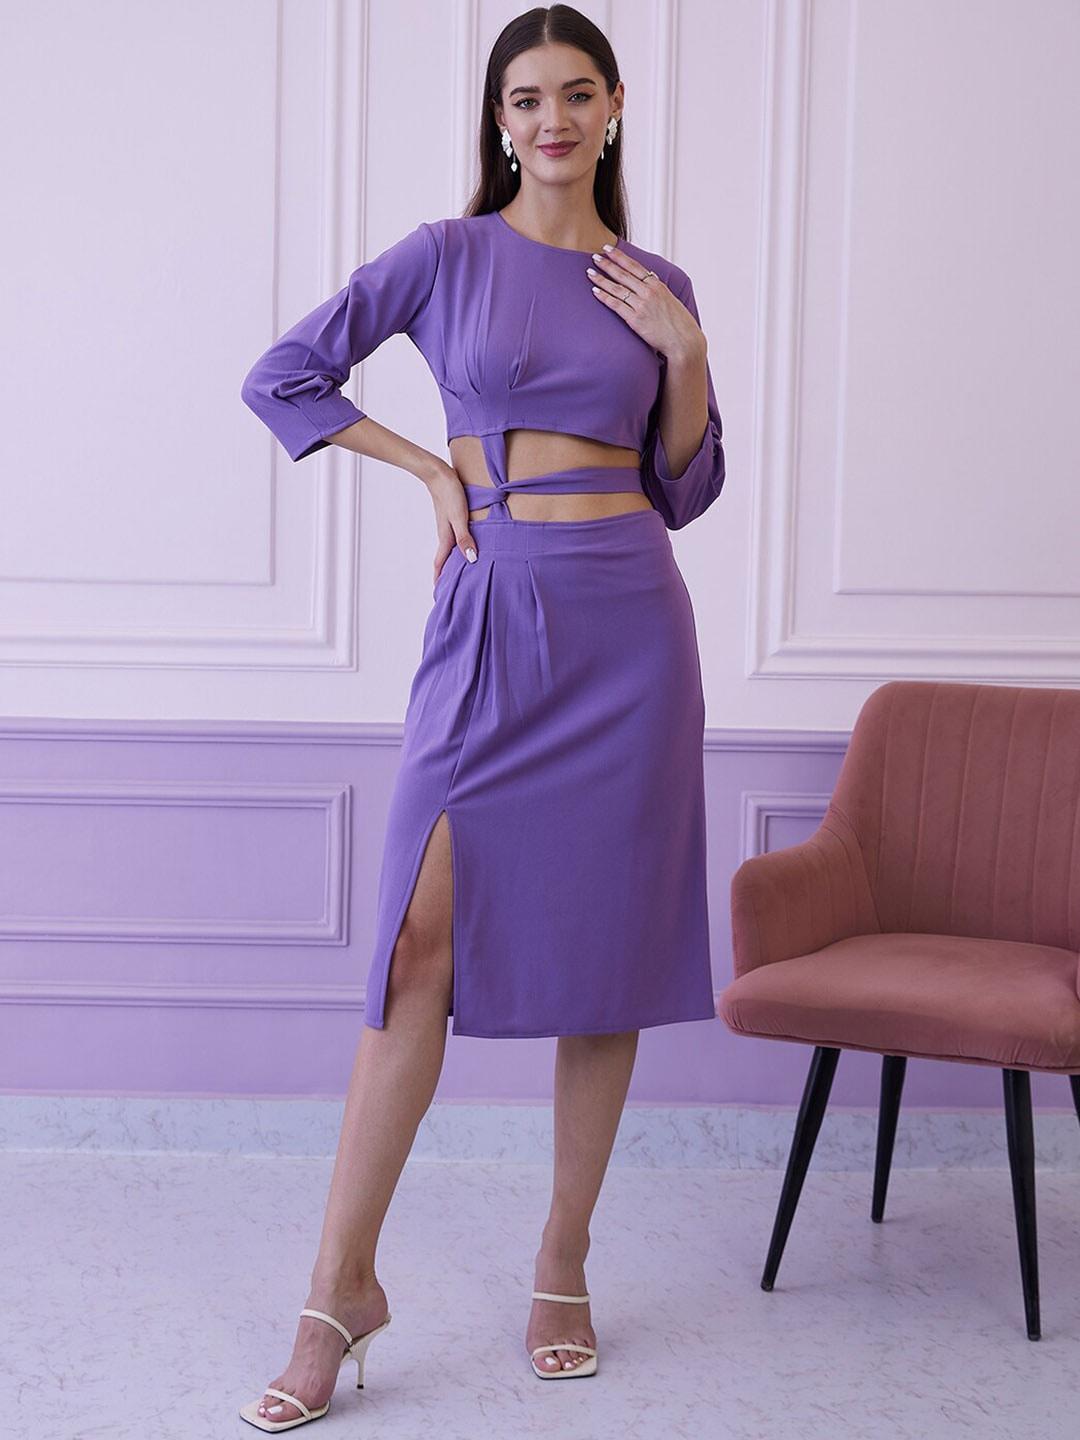 athena lavender top with slip-on skirt